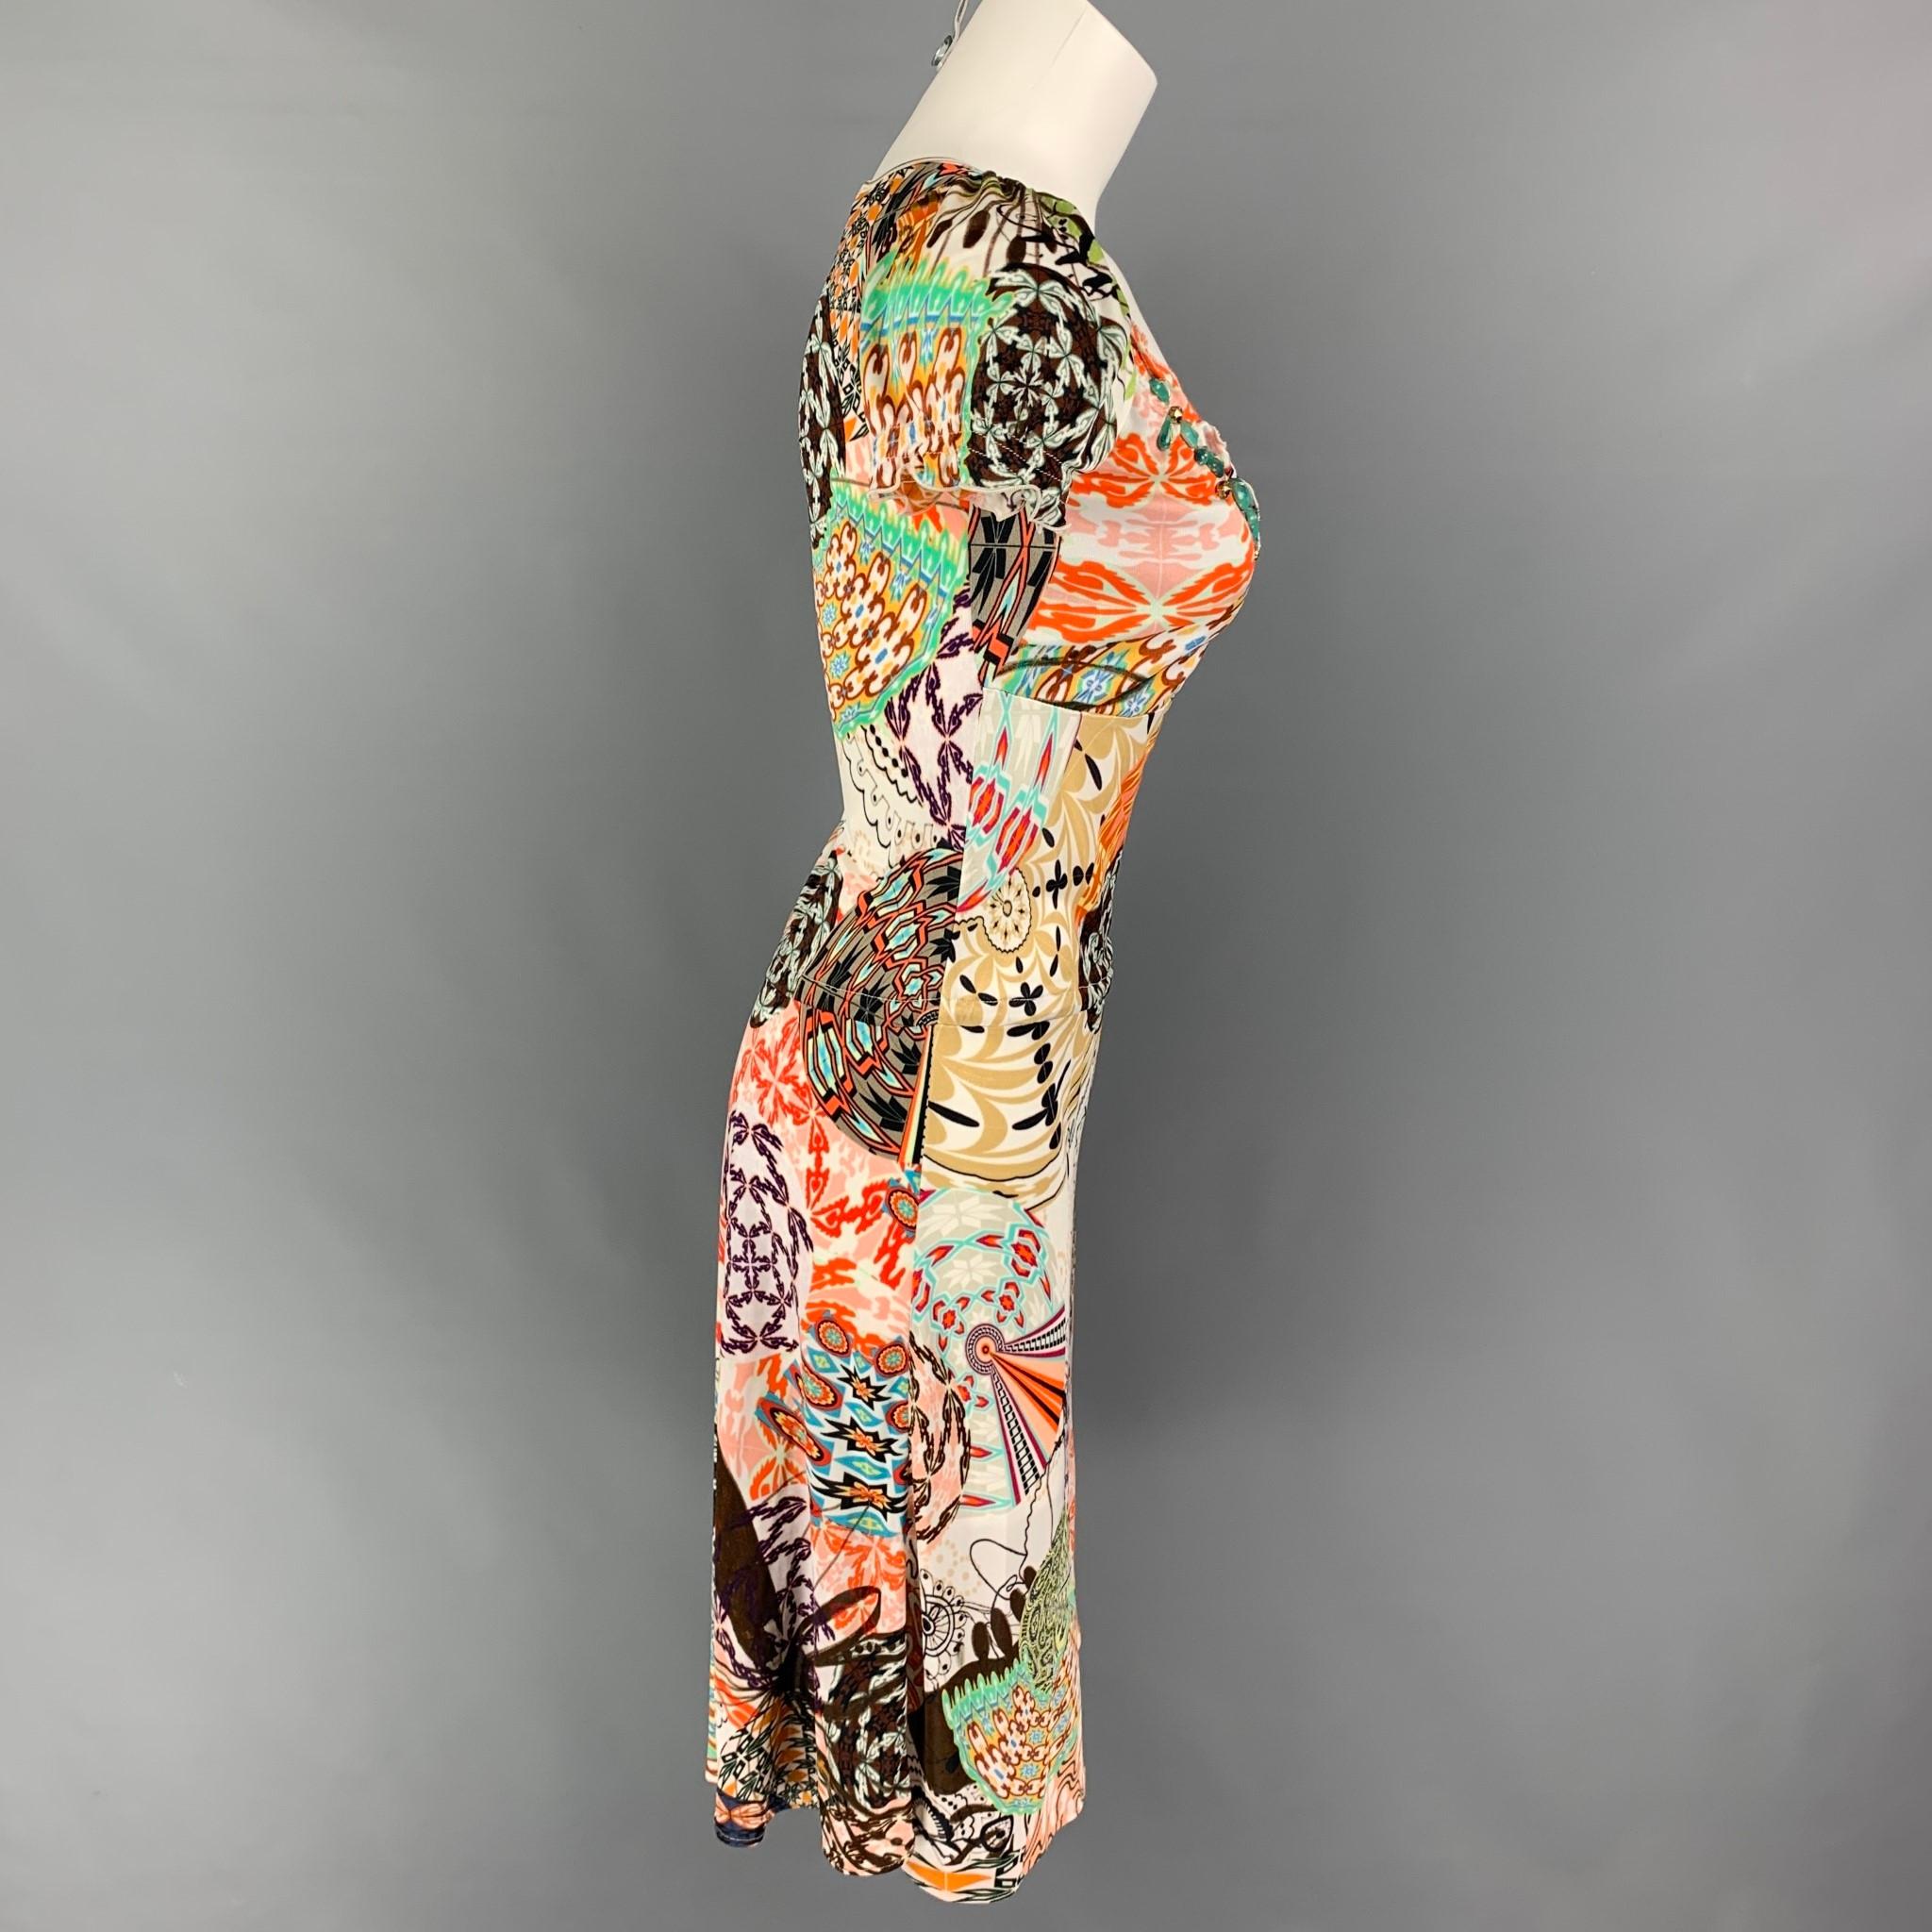 BLUEMARINE dress comes in a multi-color abstract print acetate blend featuring a elastic waist, crystal embellishments, and a v-neck. Made in Italy. 

Very Good Pre-Owned Condition.
Marked: I 38 / D 32

Measurements:

Shoulder: 10 in.
Bust: 24